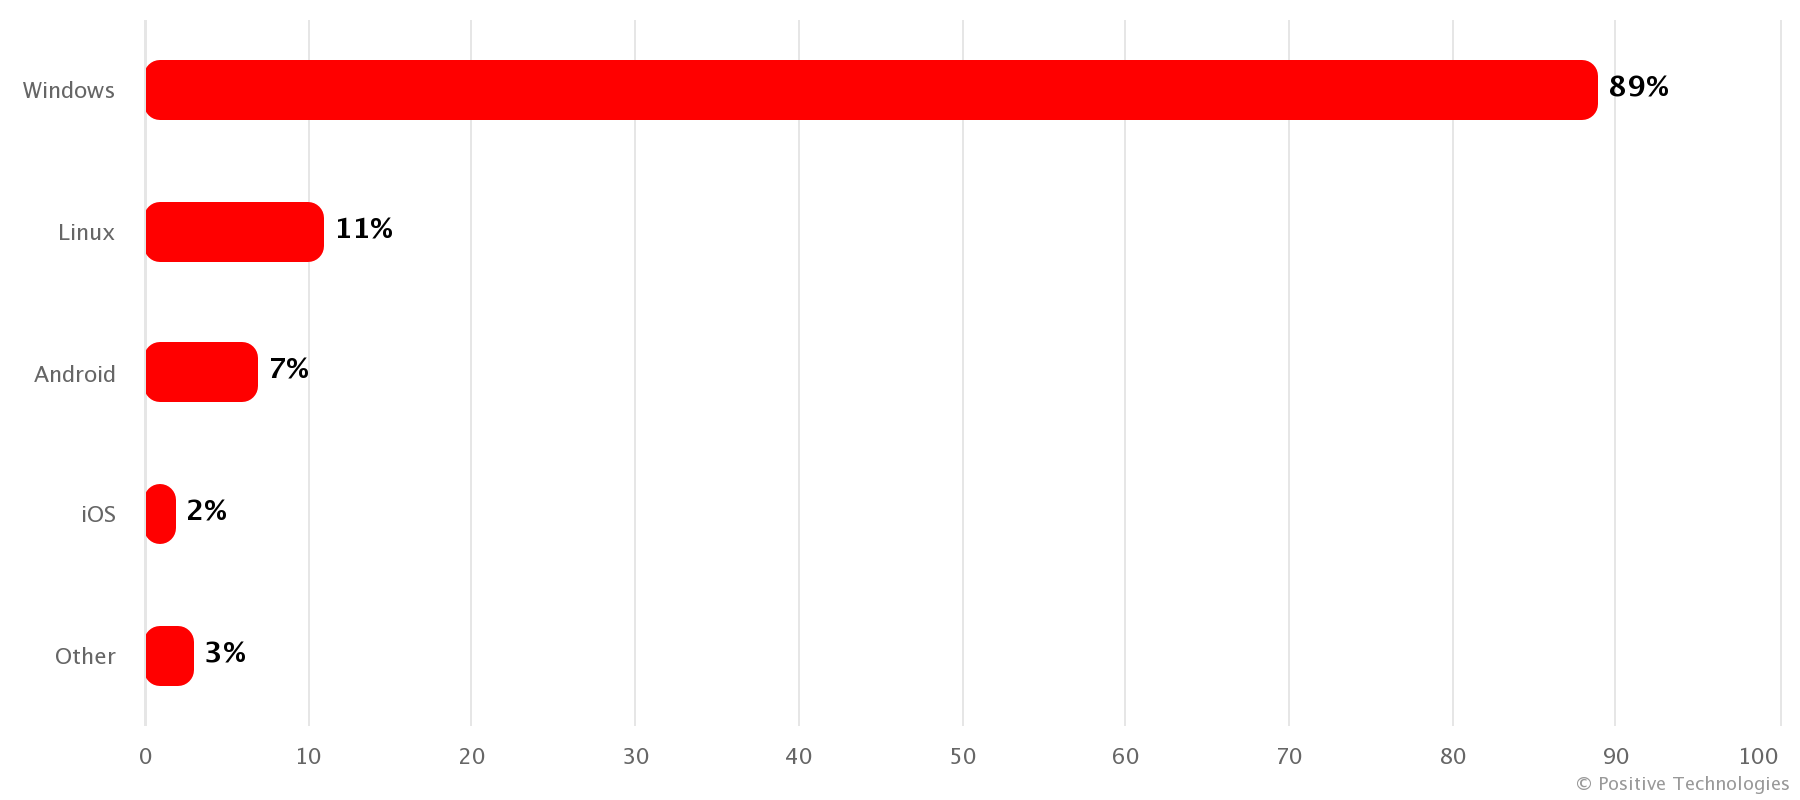 Target OS in malware attacks (percentage of successful attacks)